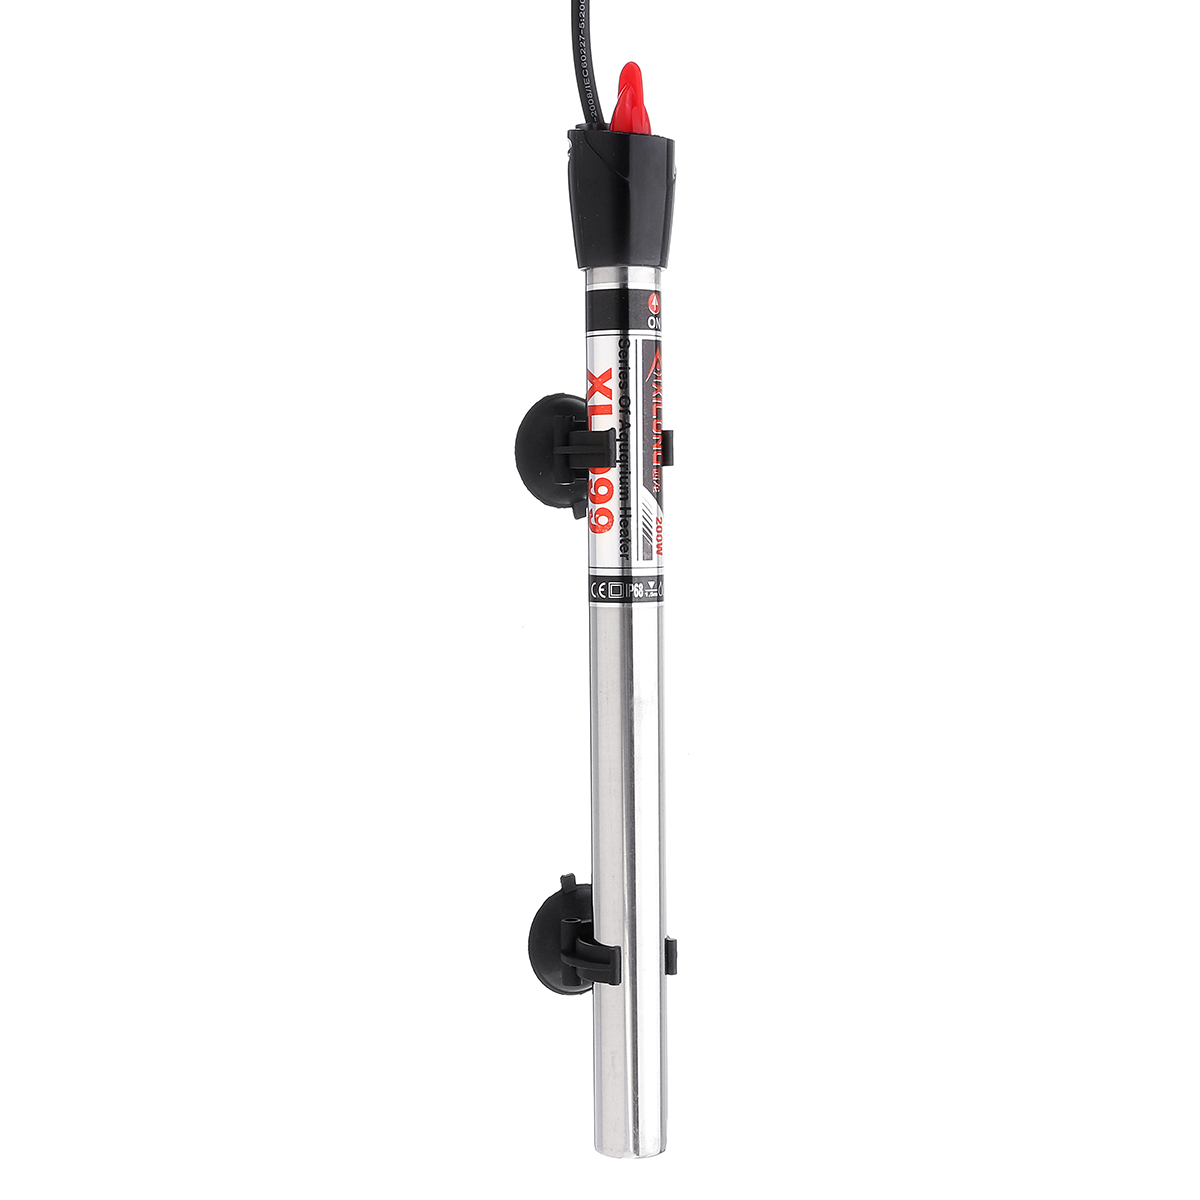 100W200W-Submersible-Stainless-Steel-Water-Heater-Rod-Aquarium-Fish-Tank-220V-1478945-4